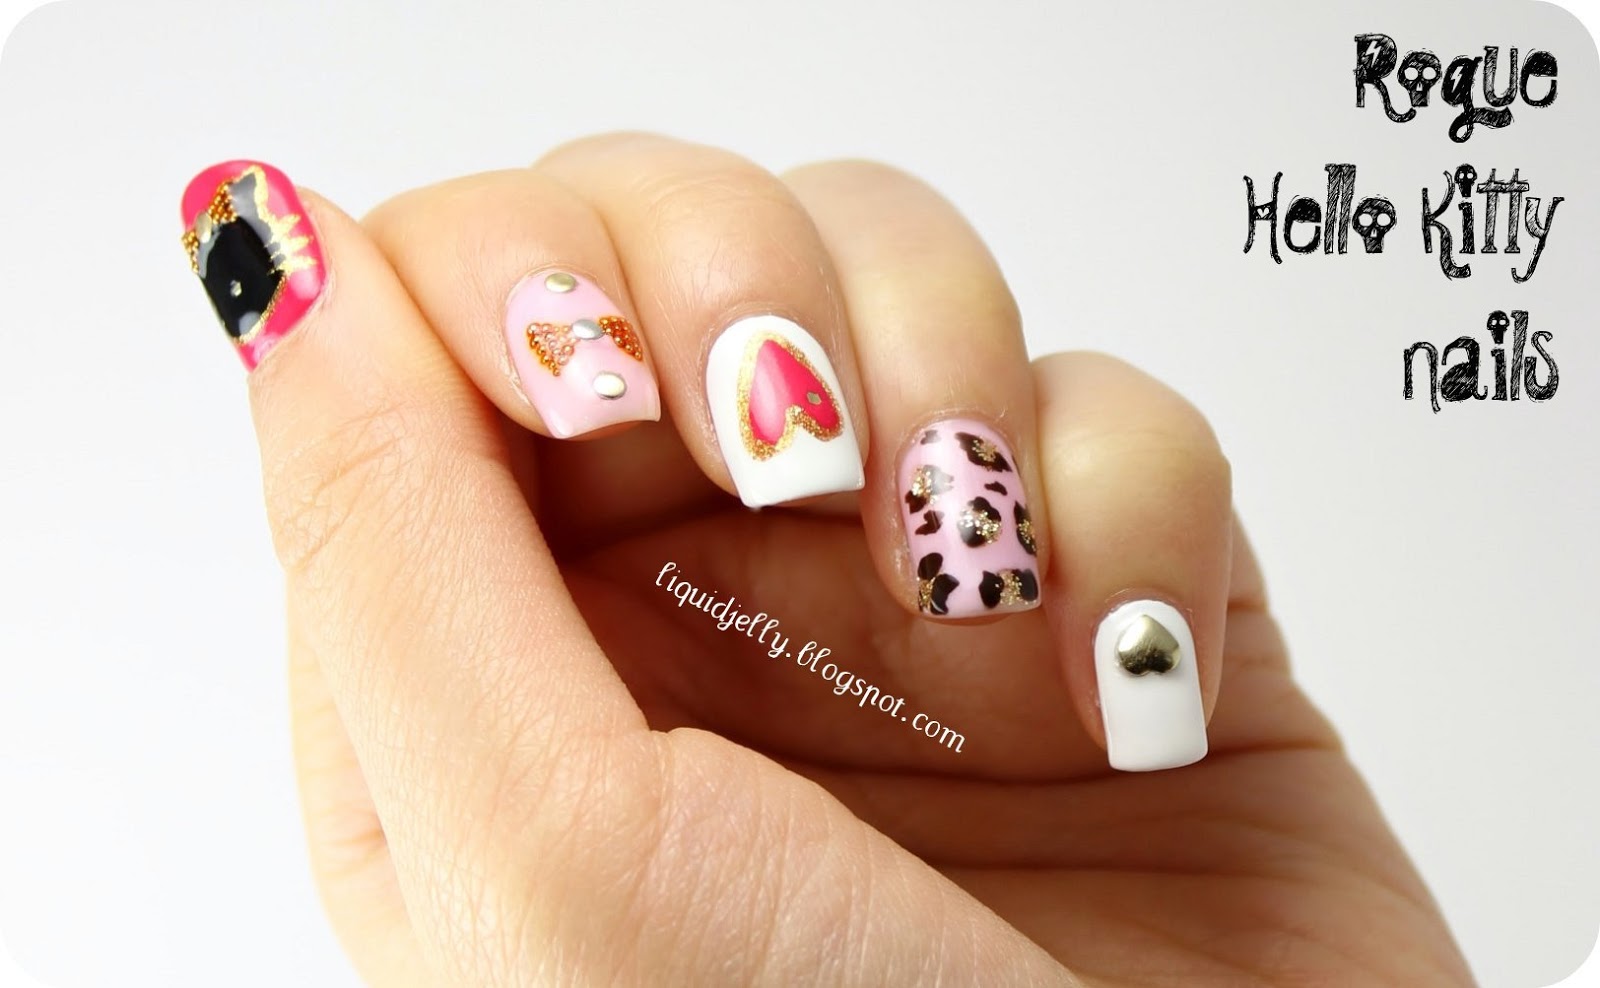 1. Hello Kitty Nail Art Designs for Cute and Adorable Nails - wide 3